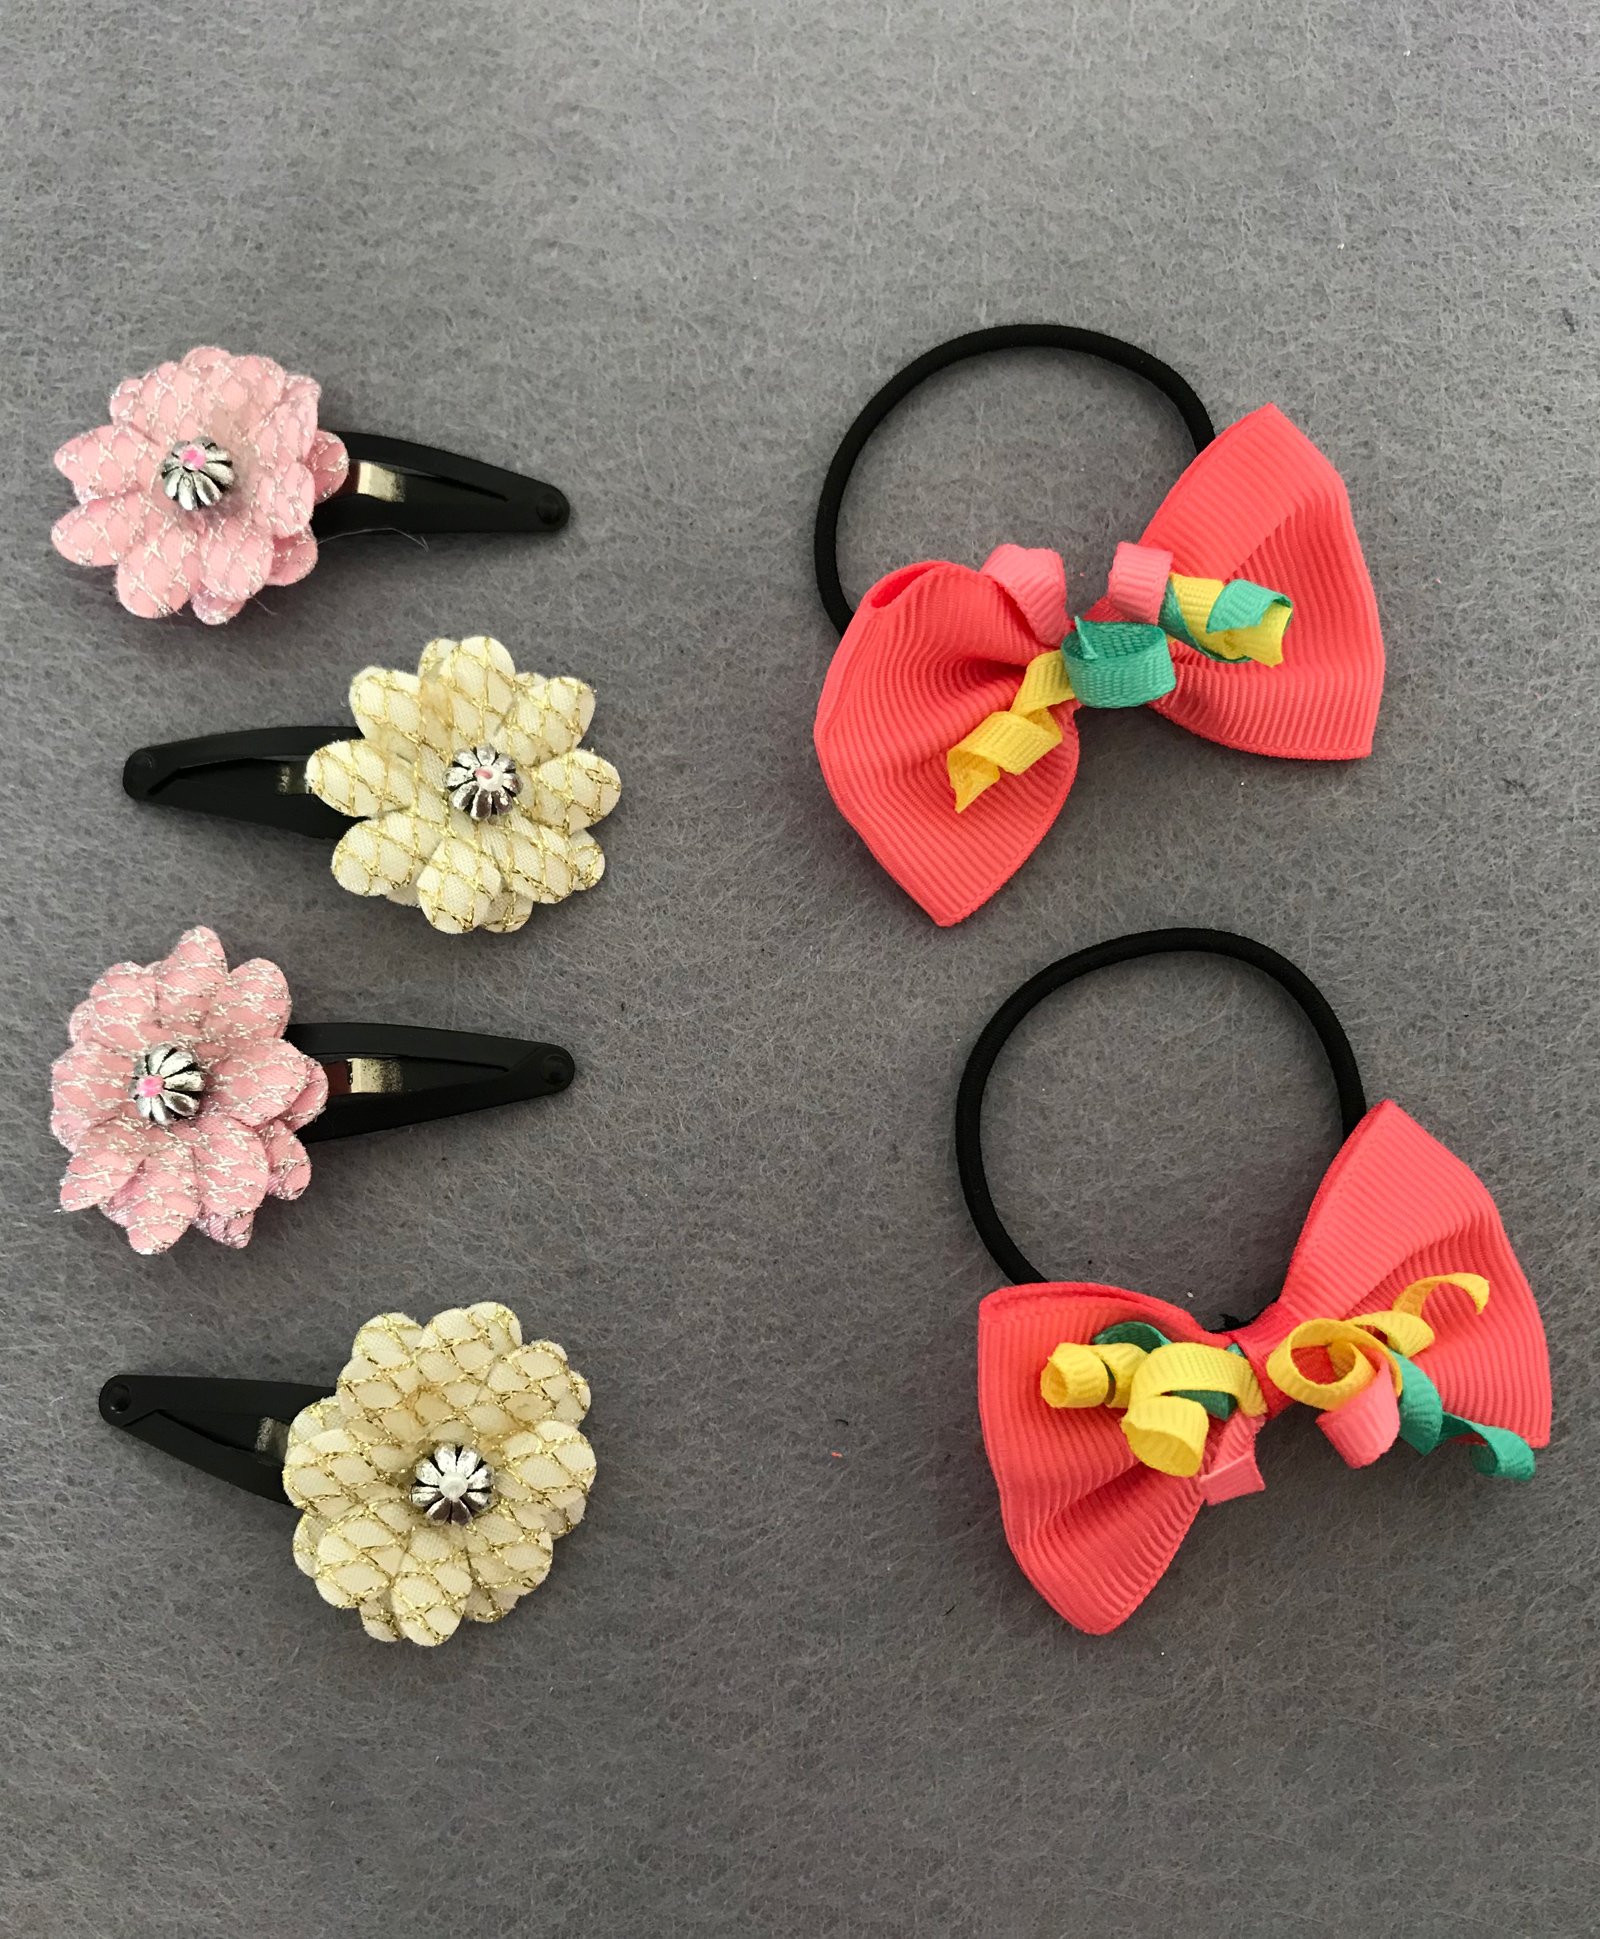 Kalacaree 2 Pair of Floral Design Hair Clips With Bow Design Rubber Bands -  Pink & White for Girls (0 Month-15 Years) Online in India, Buy at   - 8759808